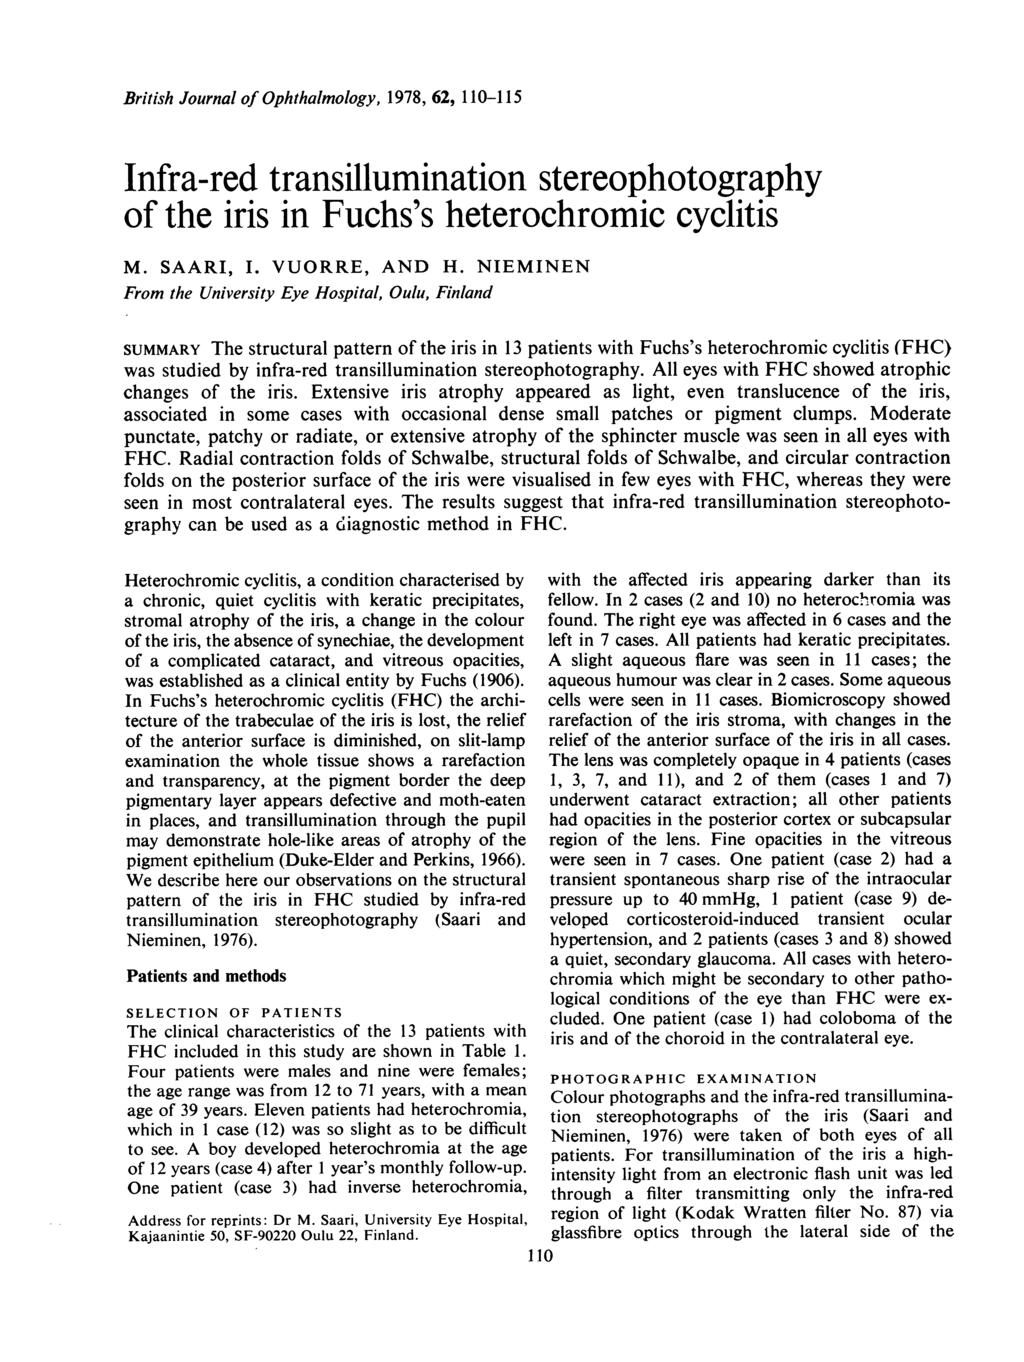 British Journal of Ophthalmology, 1978, 62, 110-115 Infra-red transillumination stereophotography of the iris in Fuchs's heterochromic cyclitis M. SAARI, I. VUORRE, AND H.